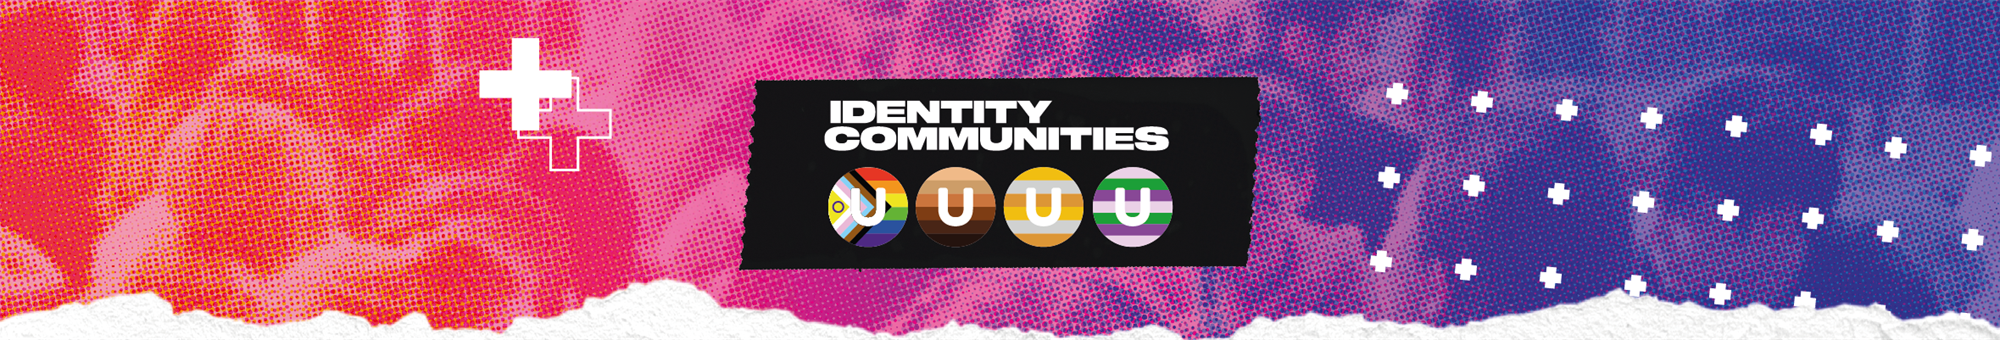 Join one (or more) of our Identity Communities today to be invited to our next online meeting! Could you be a Community Leader?